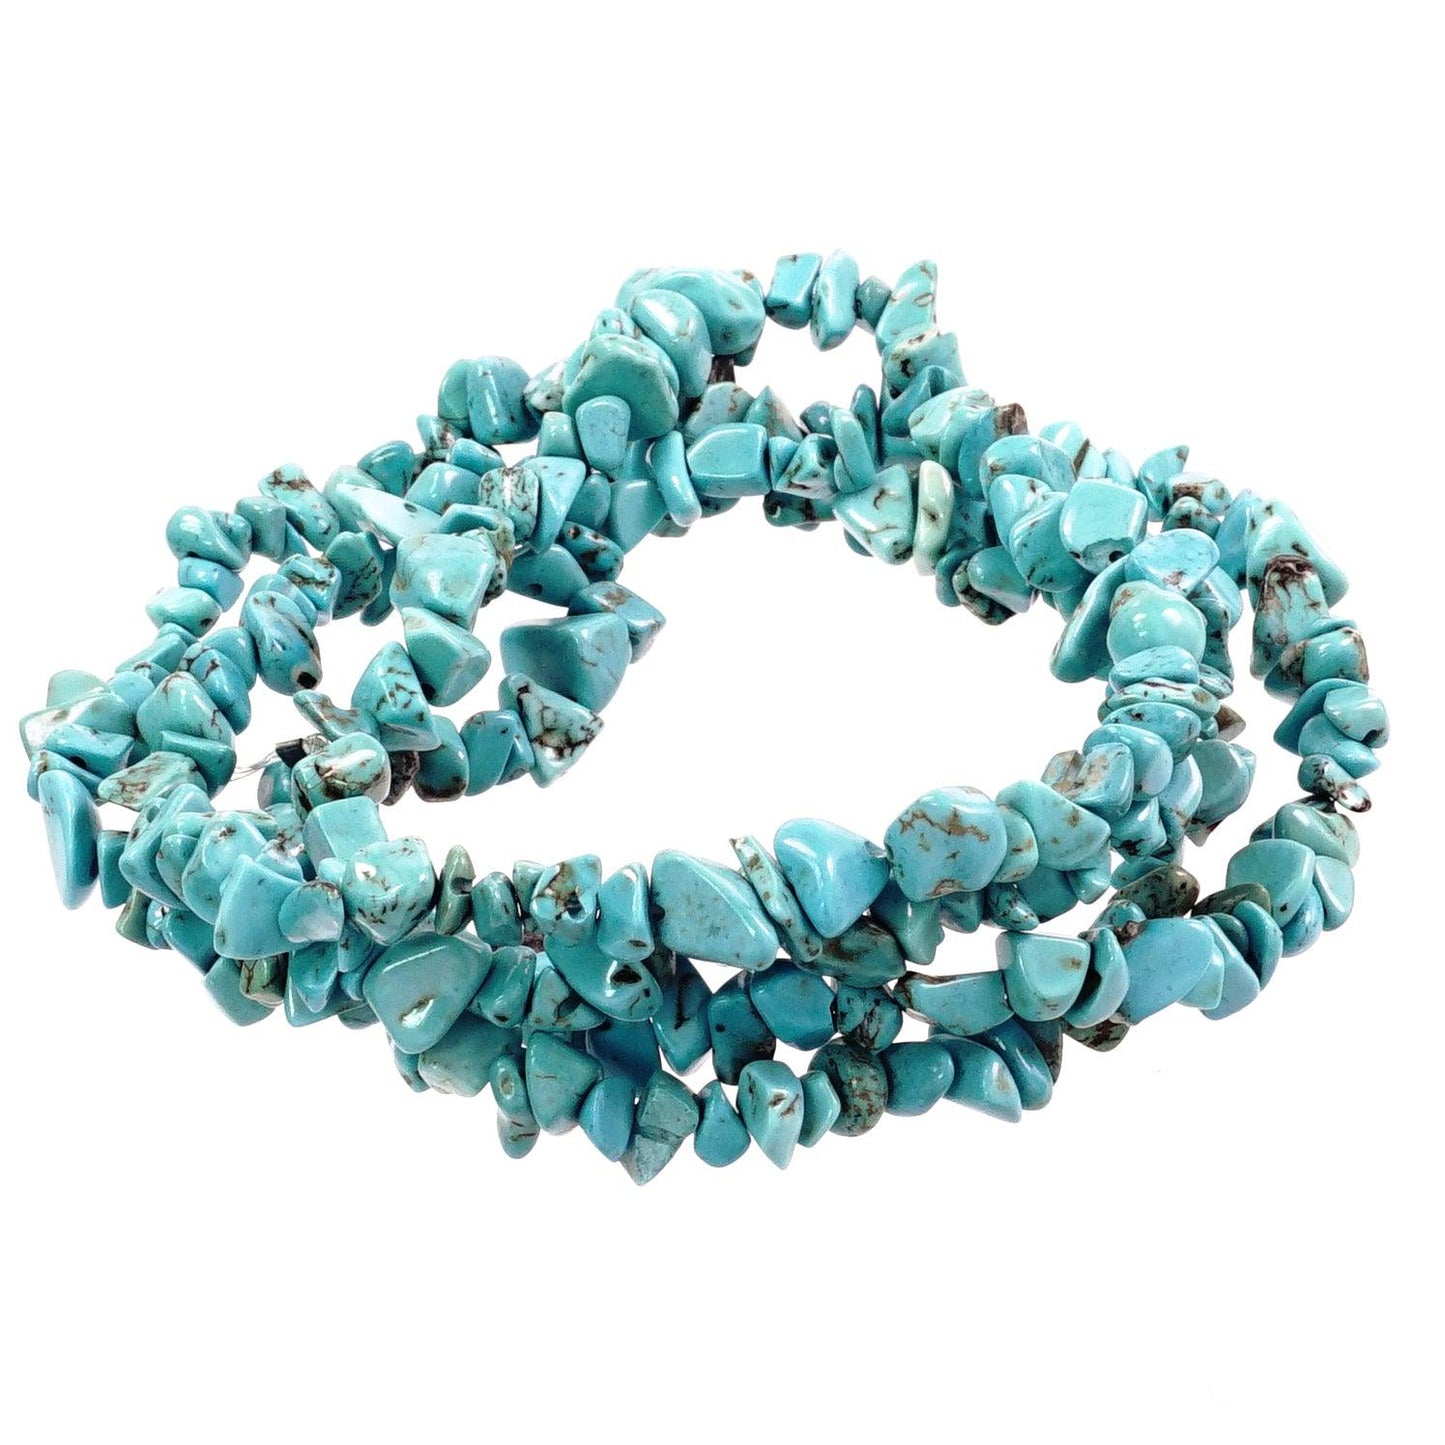 Blue Magnesite Chips (36 inch strand) - Too Cute Beads